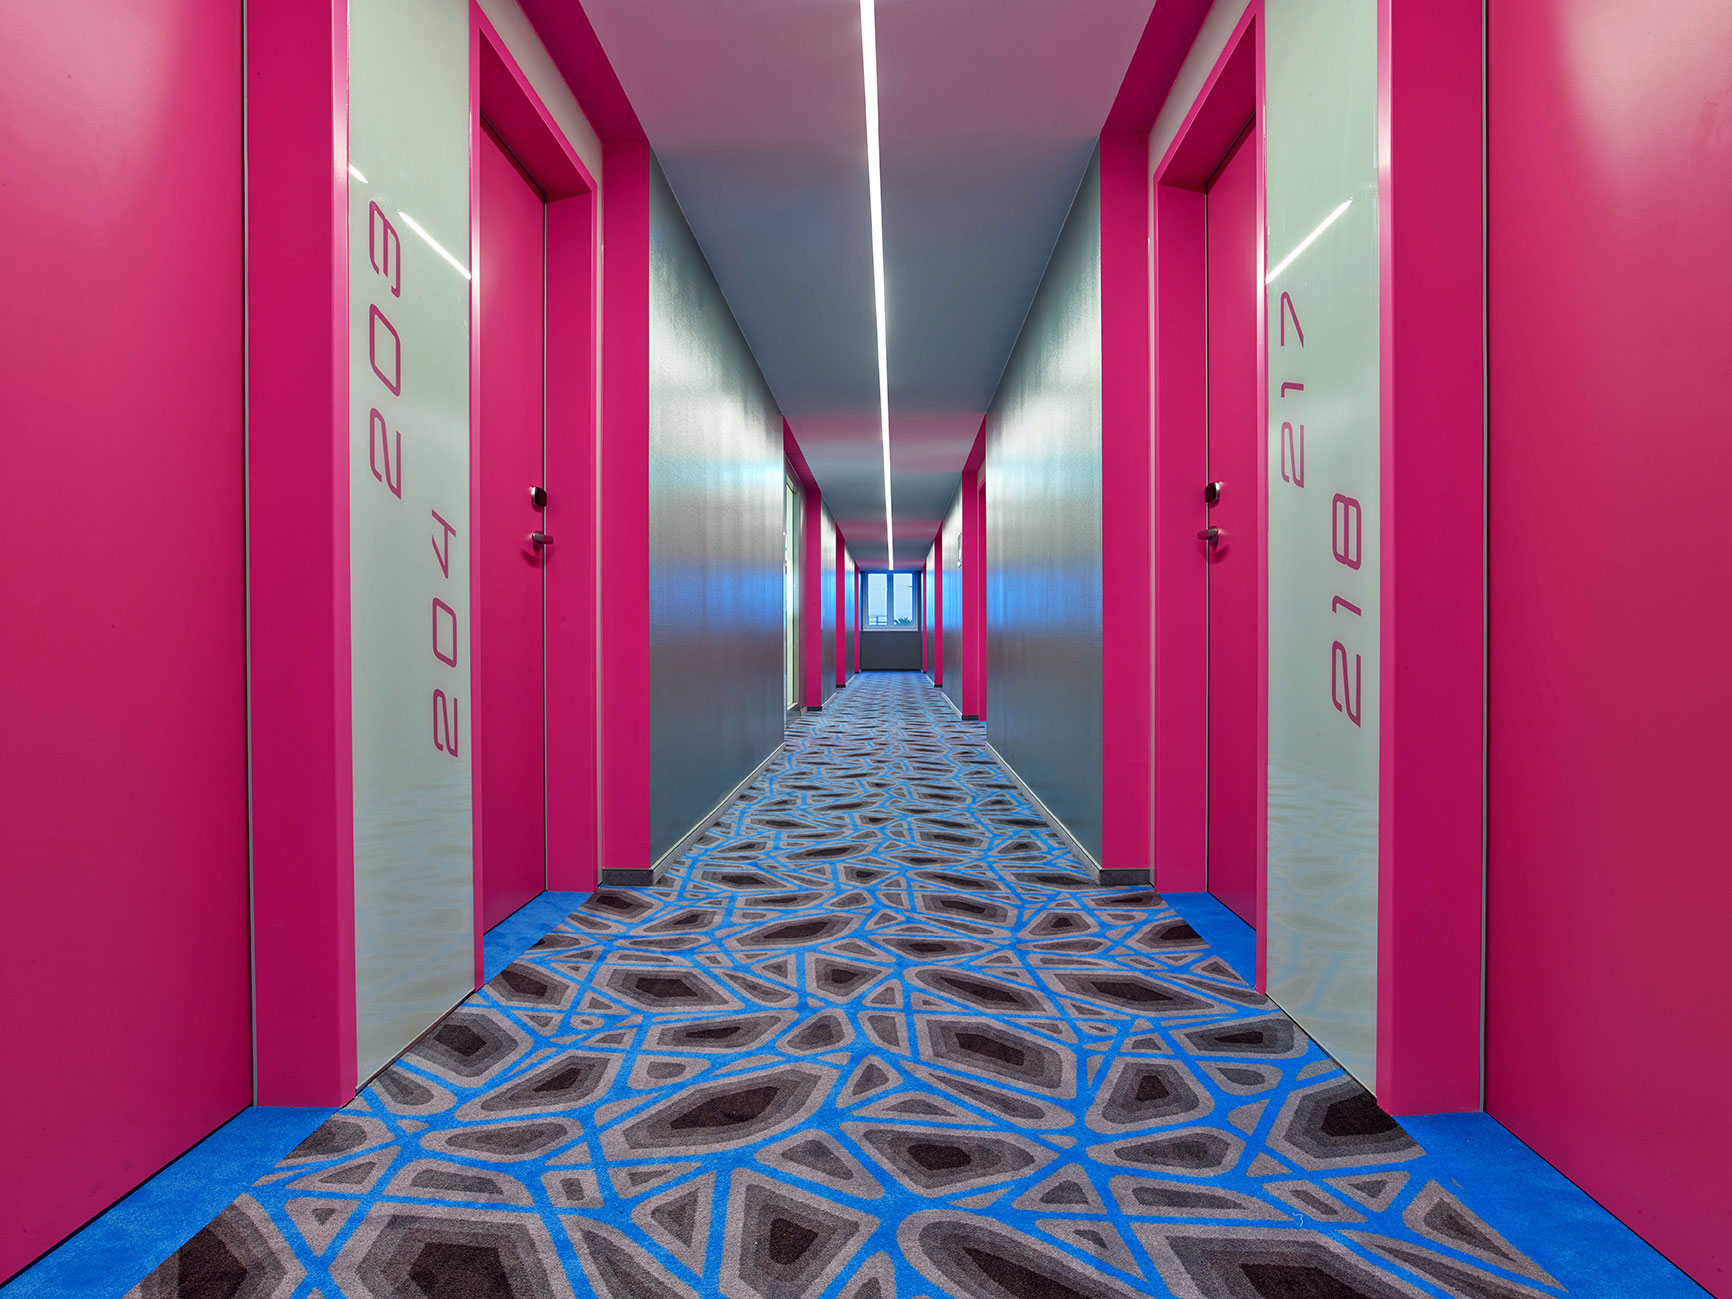 Hotel hallway with pink doors and a floor with blue pattern